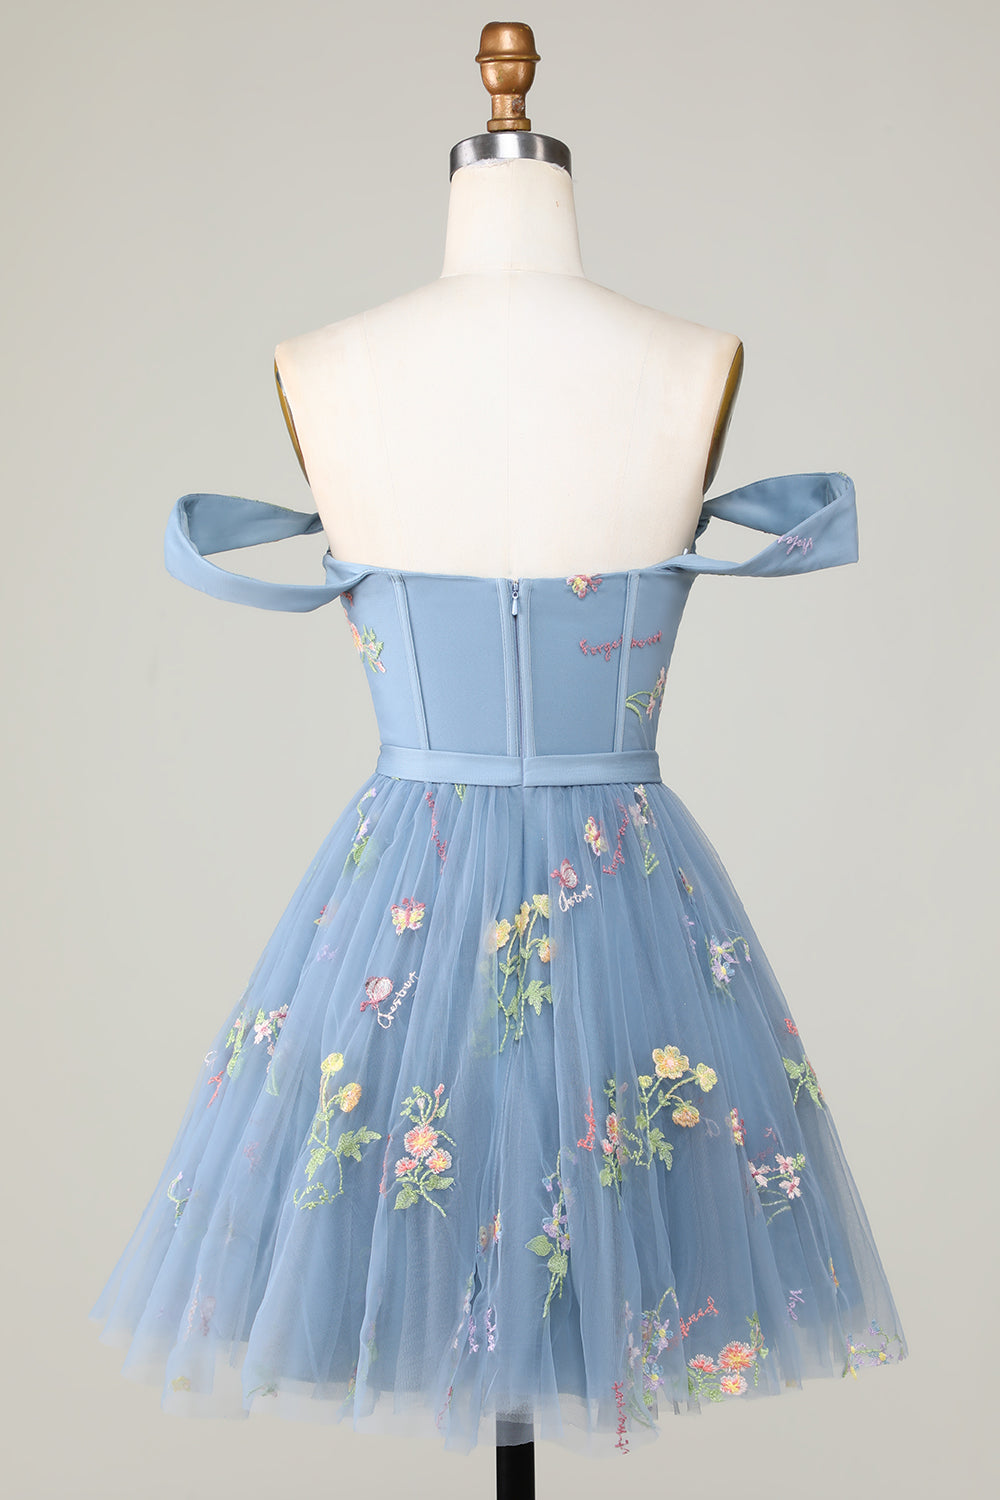 Cute A Line Sweetheart Grey Blue Short Homecoming Dress with Embroidery